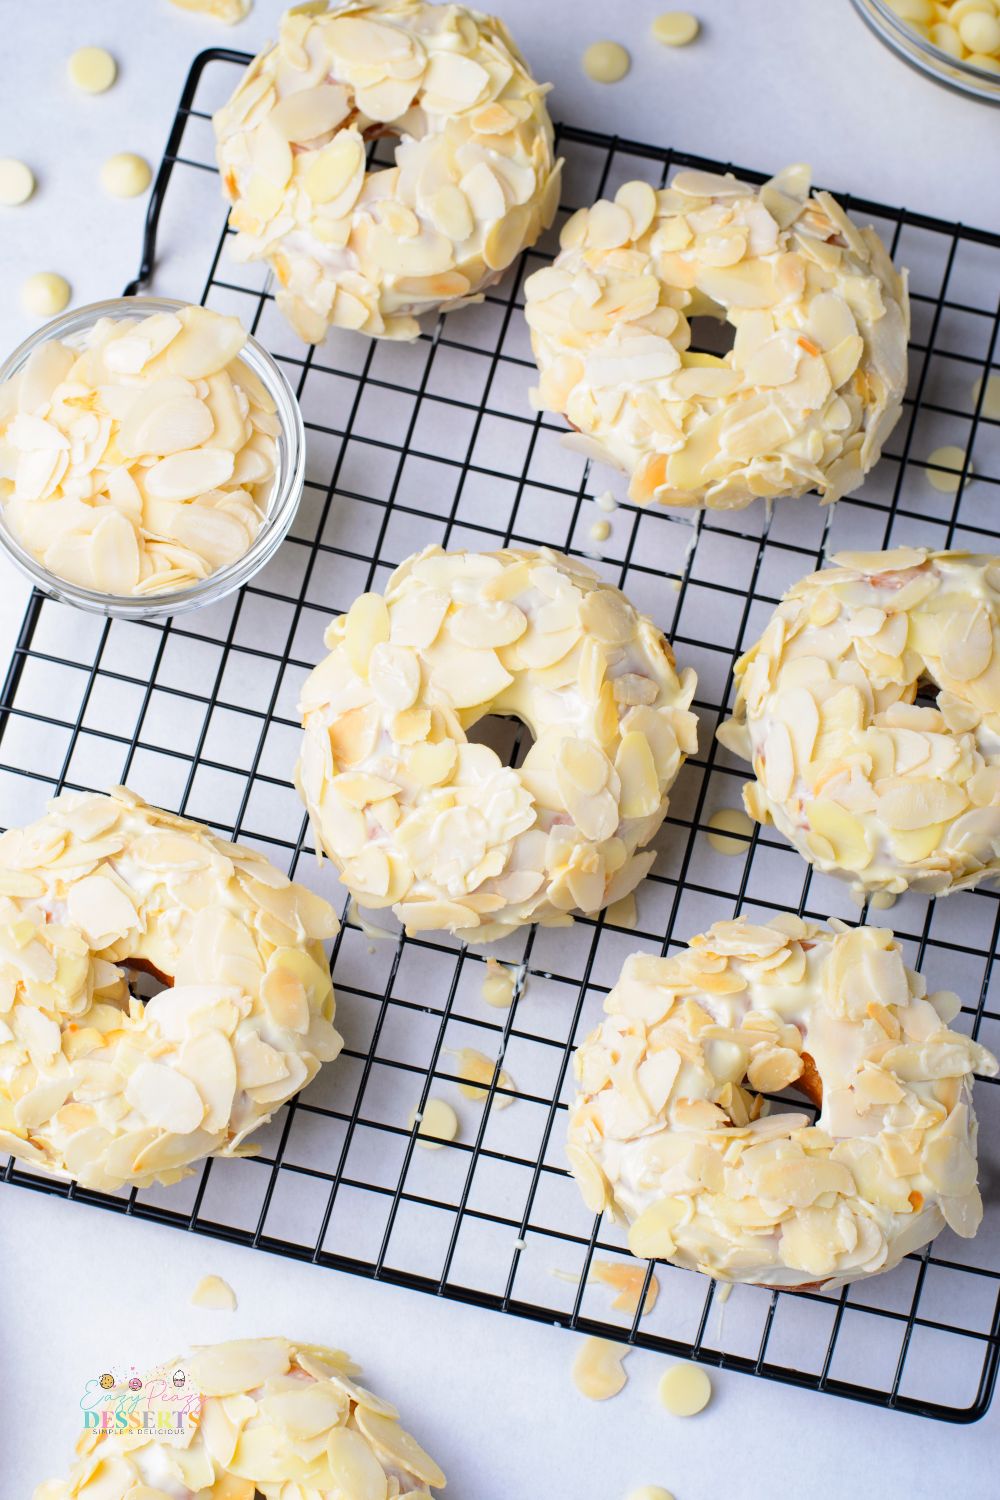 Over head image of yeast donuts with white chocolate glaze